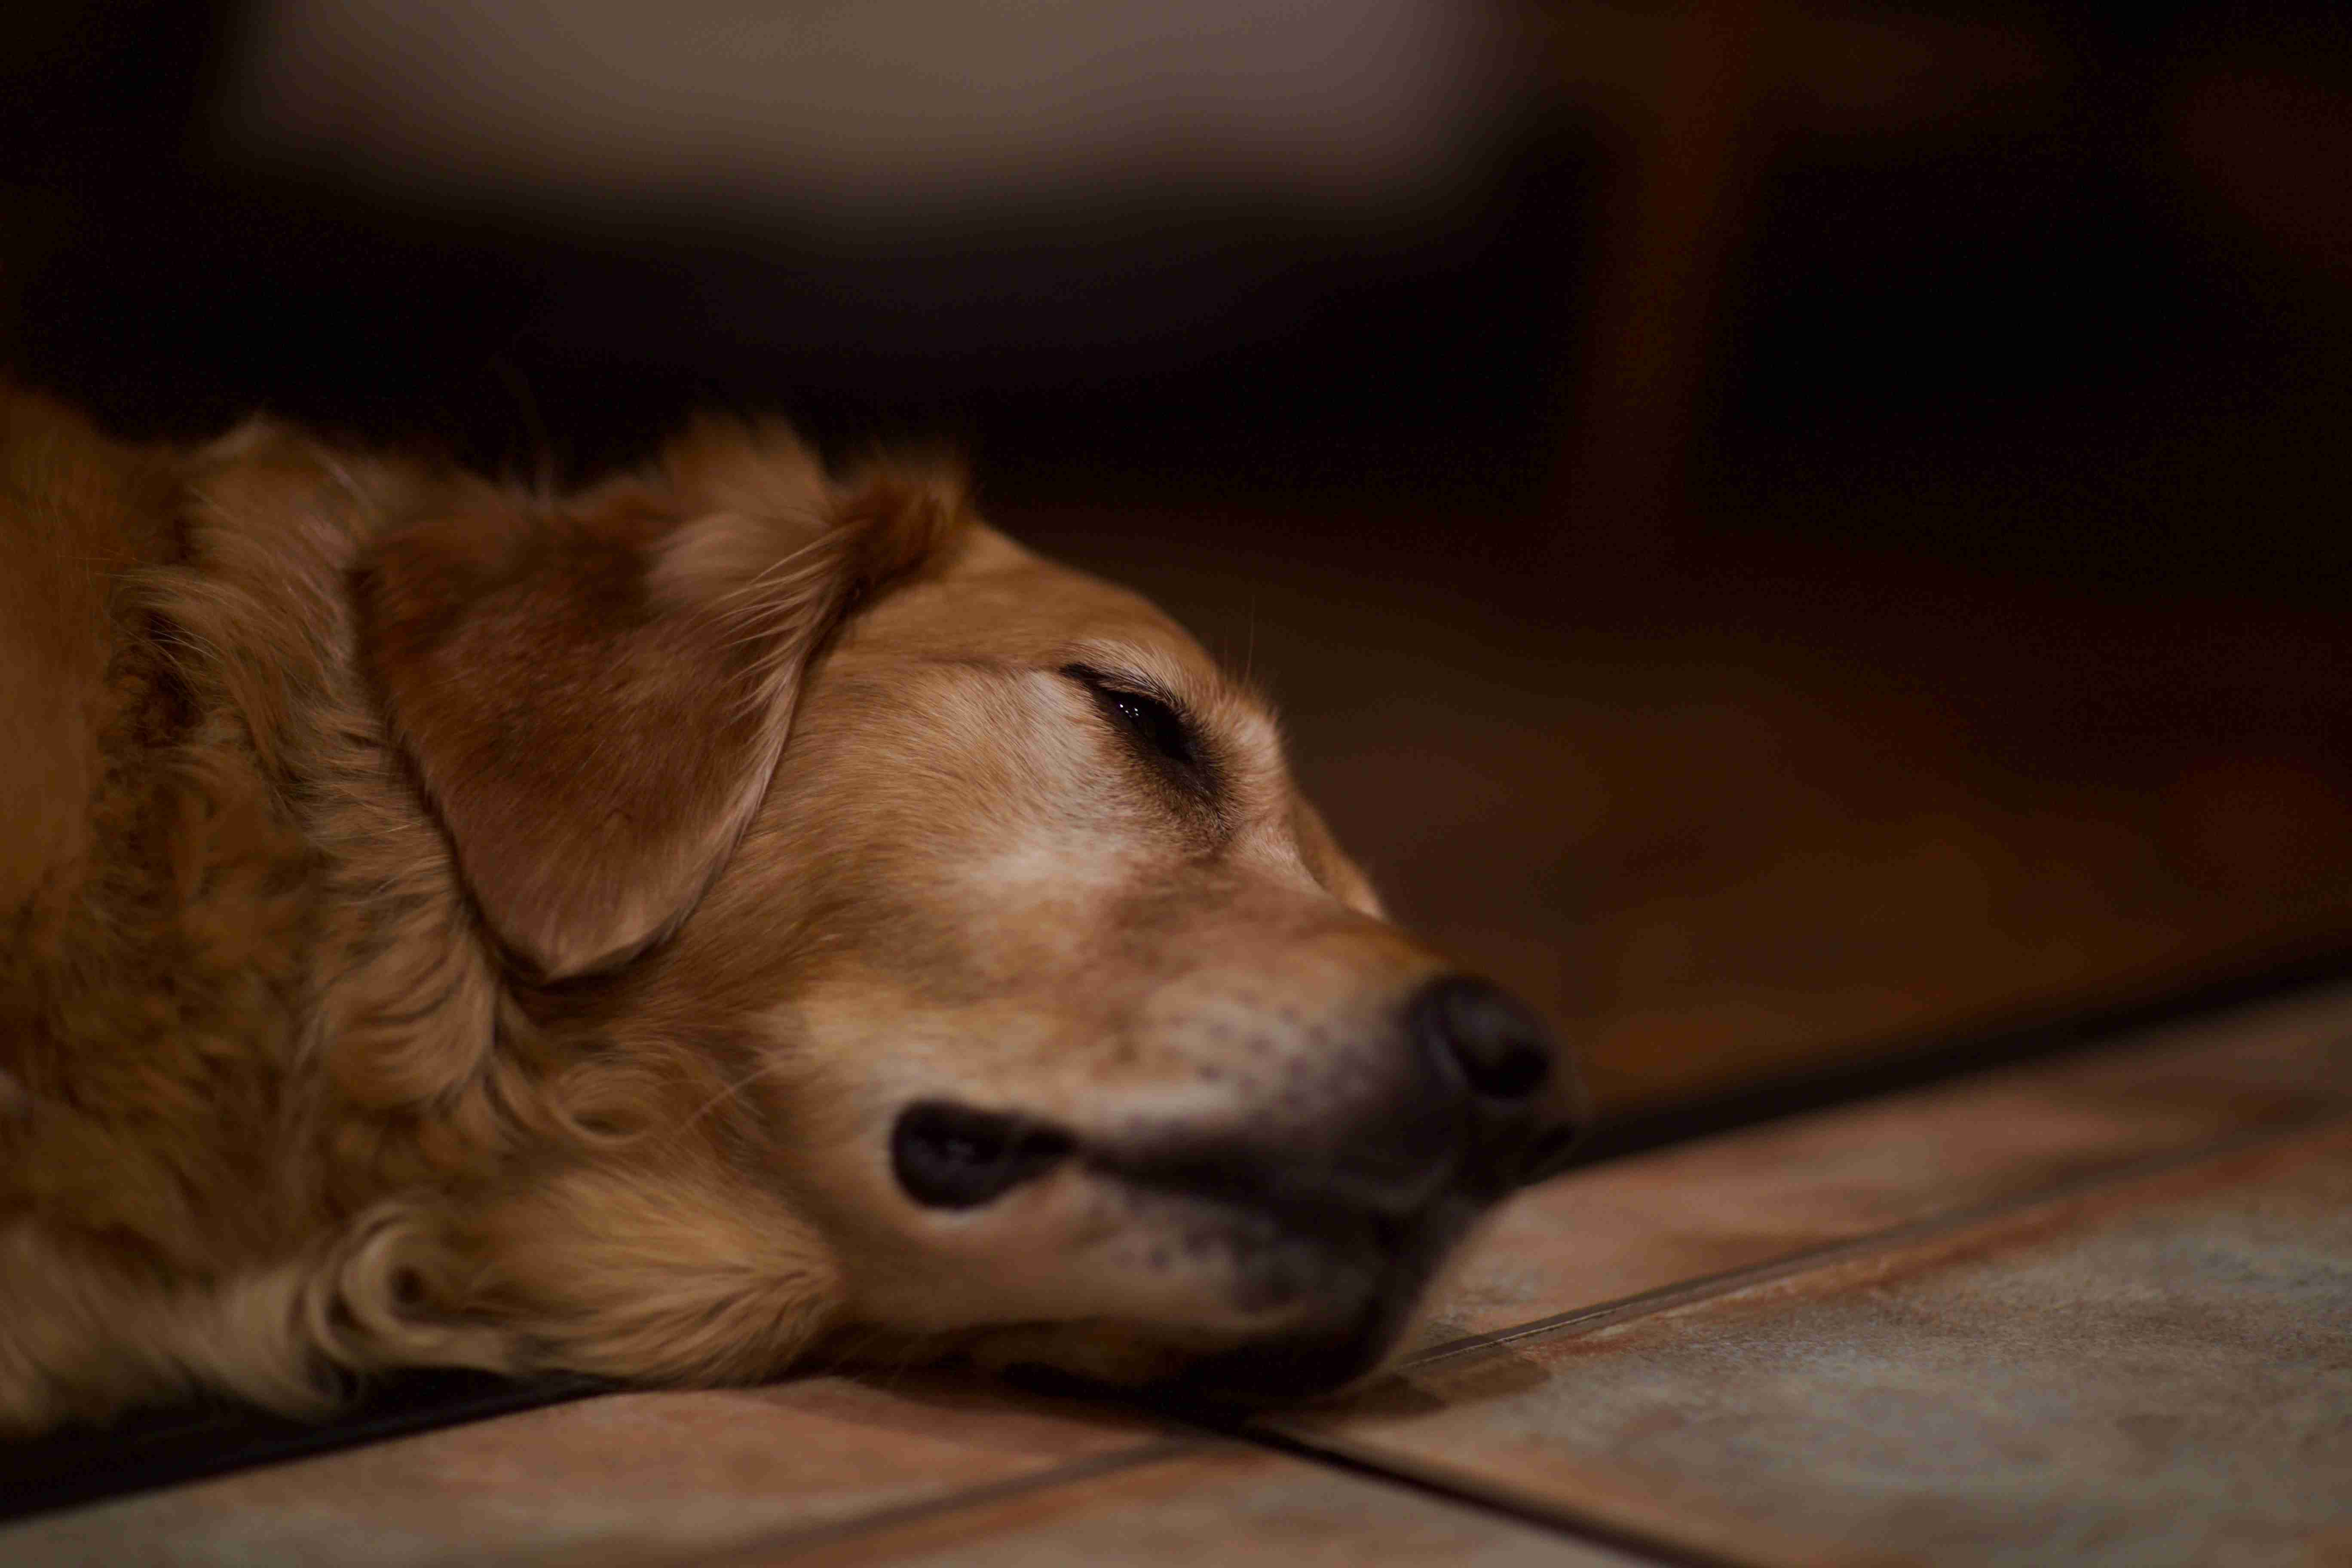 How can I prevent my golden retriever from developing ear infections?